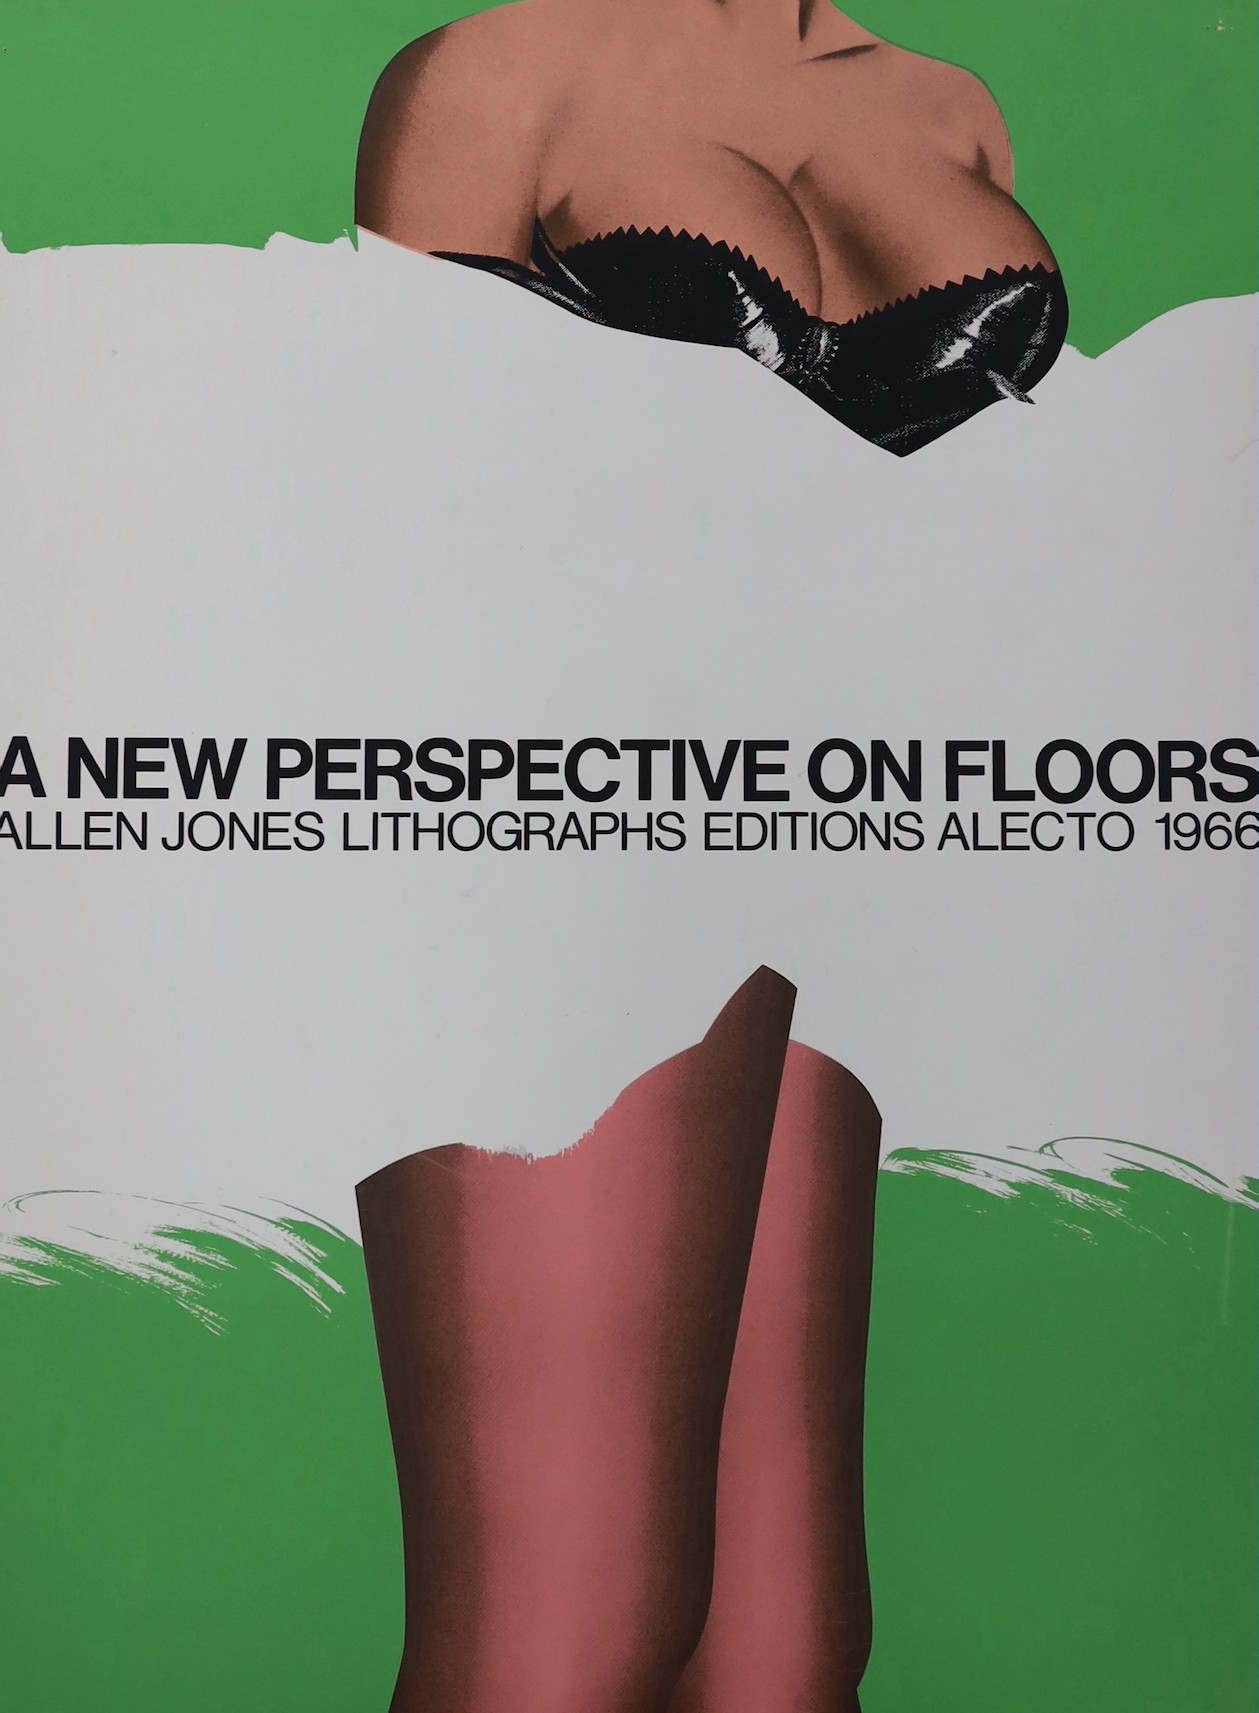 Allen Jones R.A. (b.1937), two offset lithographs, posters for A New Perspective on Floors, 76 x 57cm & Life Class, 85 x 55cm.